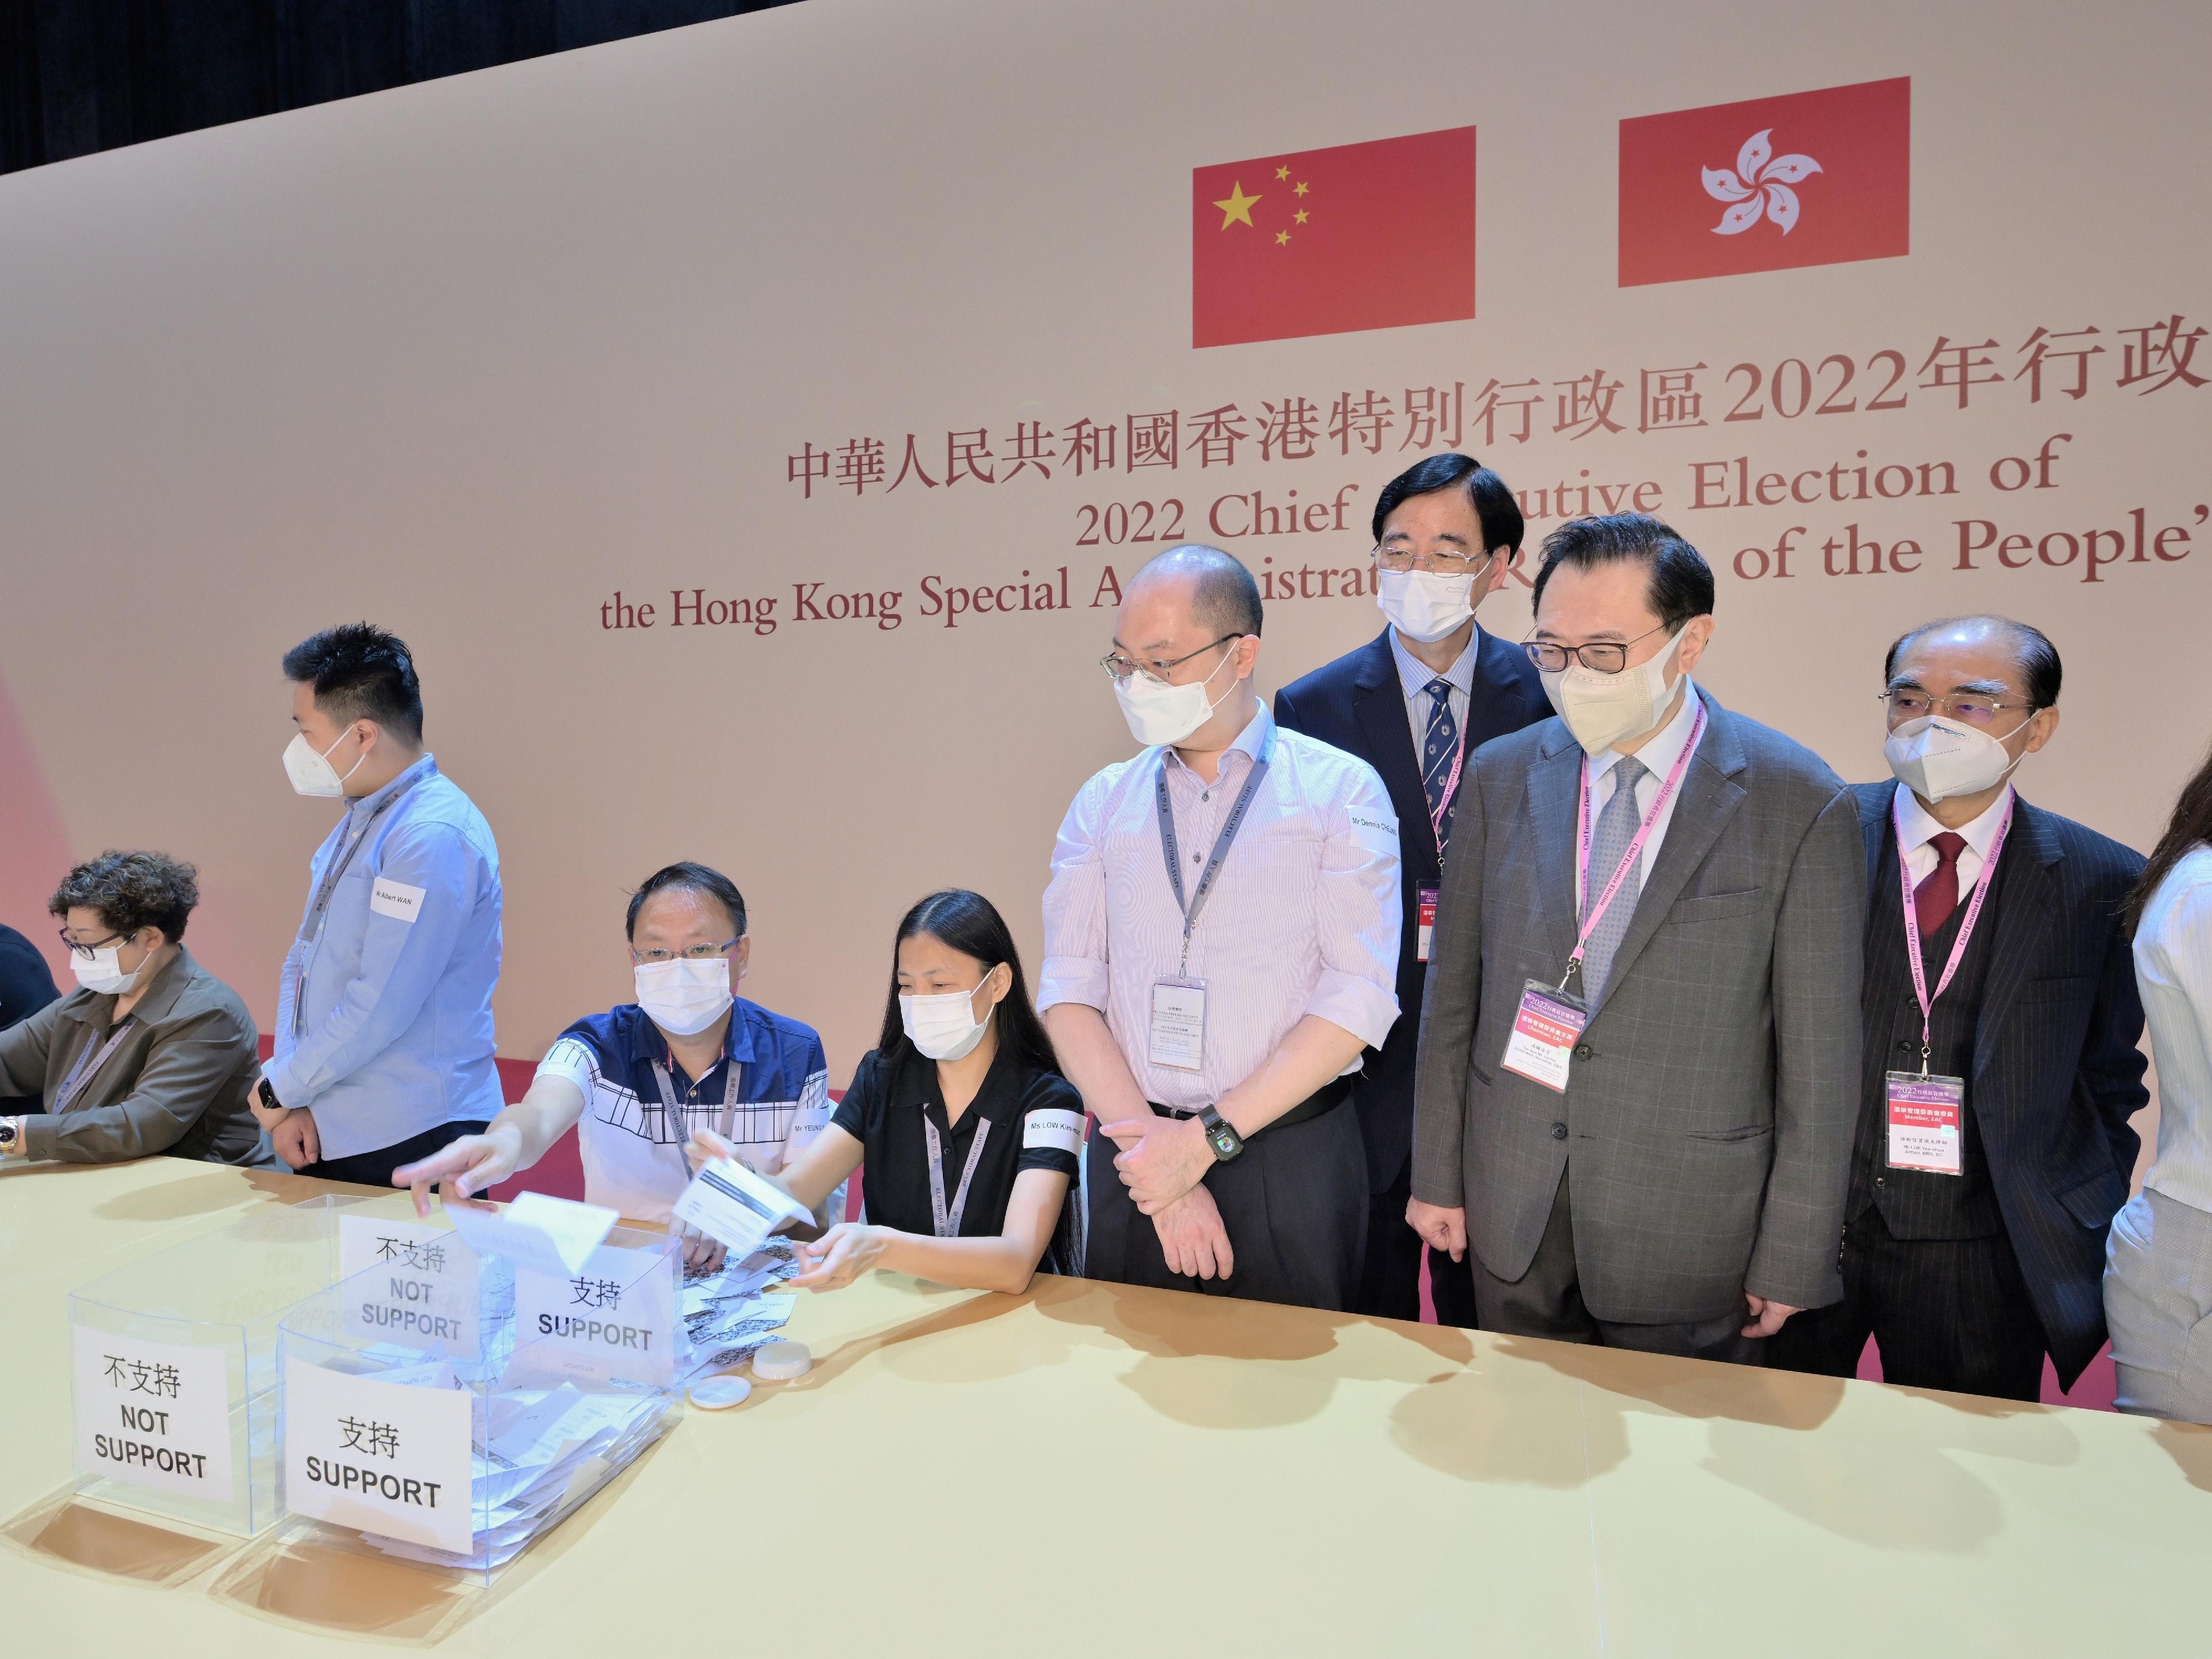 The Chairman of the Electoral Affairs Commission (EAC), Mr Justice Barnabas Fung Wah (second right) and EAC members Mr Arthur Luk, SC (first right), and Professor Daniel Shek (third right), visit the central counting station cum media centre of the 2022 Chief Executive Election at the Hong Kong Convention and Exhibition Centre in Wan Chai today (May 7).